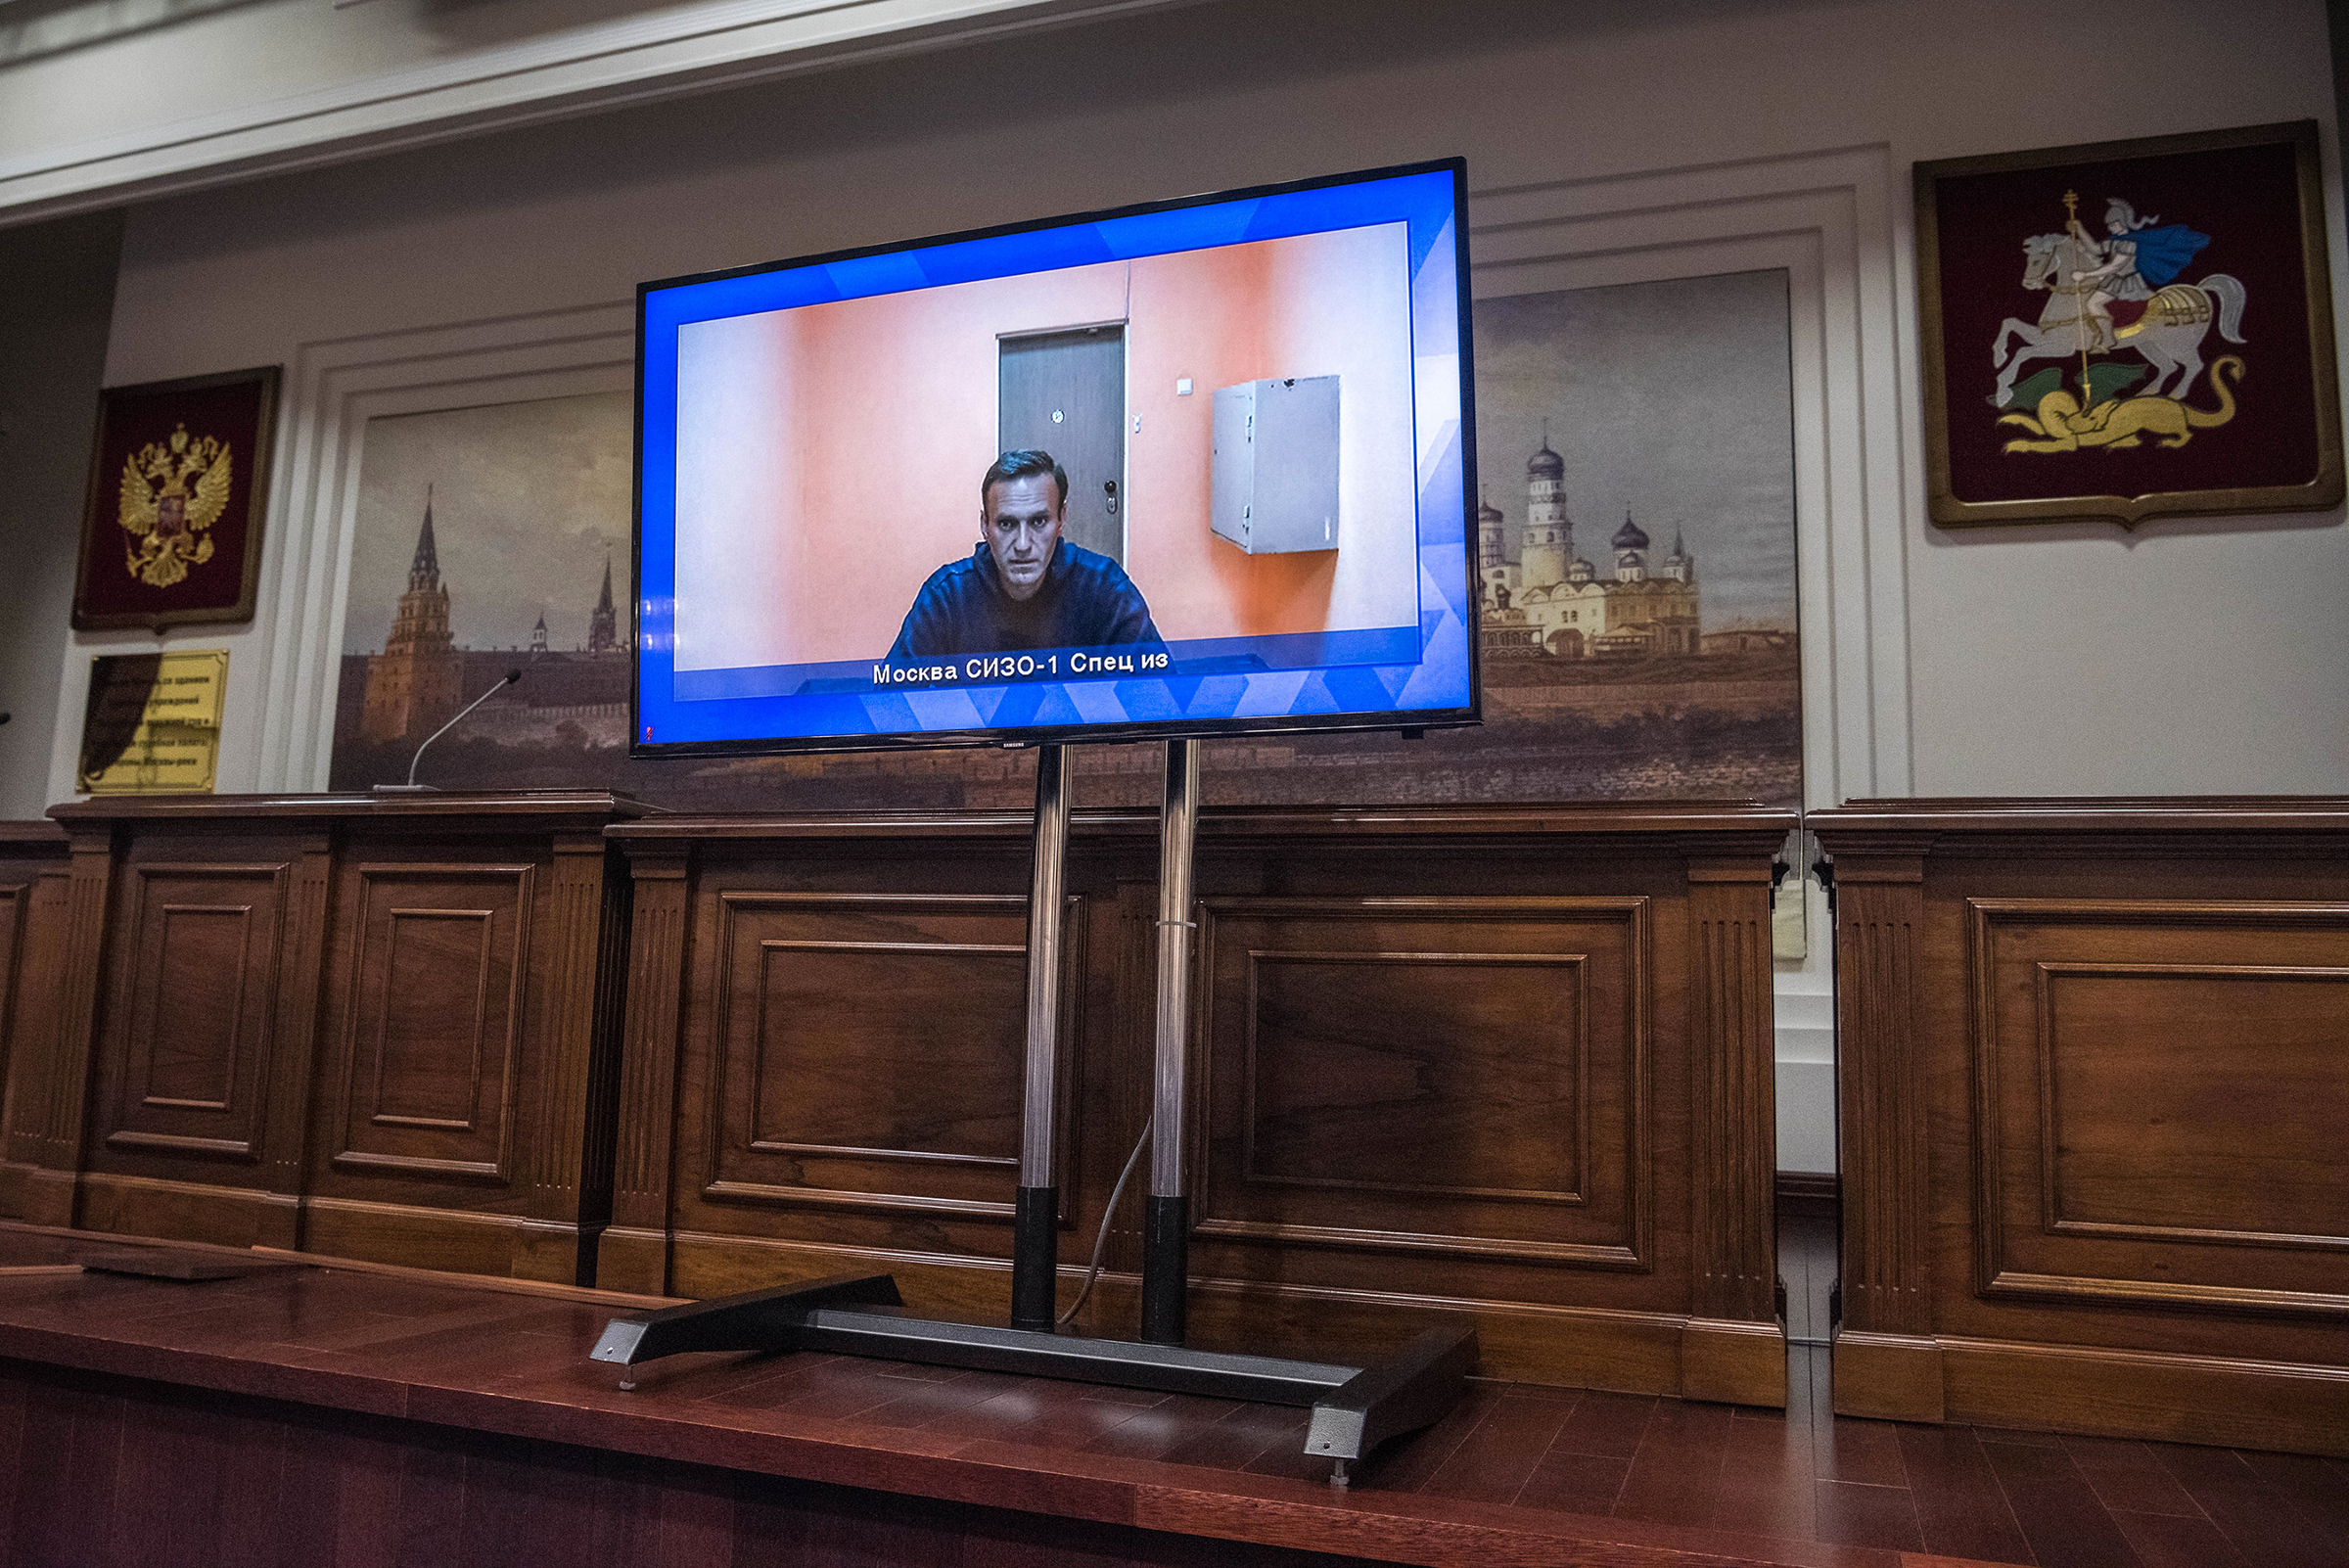 Russian opposition leader Alexei Navalny appears via video link for a court hearing, in which it was directed that he remain imprisoned, in Moscow on Jan. 28, 2021. (Sergey Ponomarev—The New York Times/Redux)